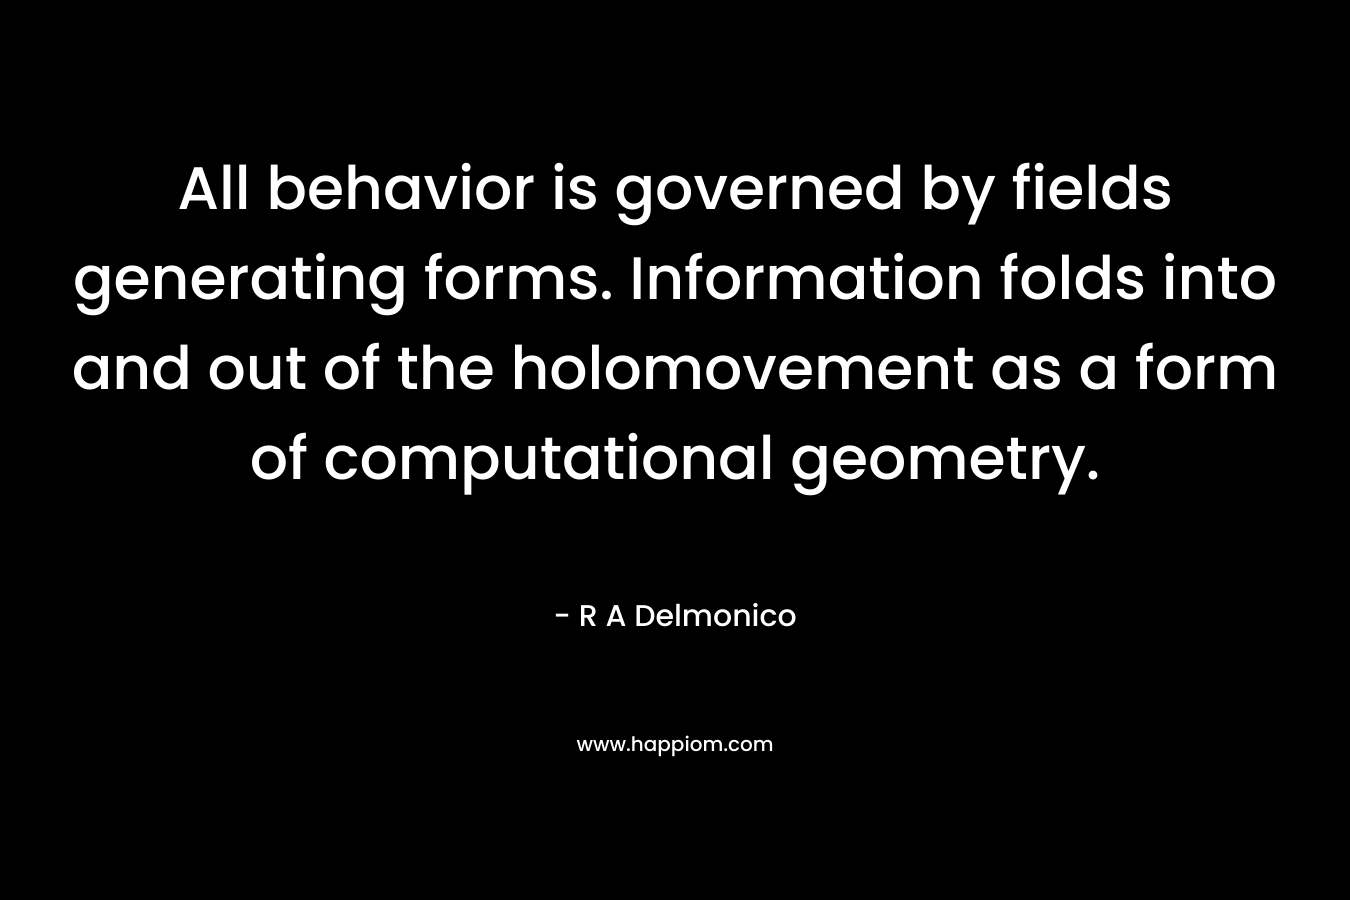 All behavior is governed by fields generating forms. Information folds into and out of the holomovement as a form of computational geometry. – R A Delmonico